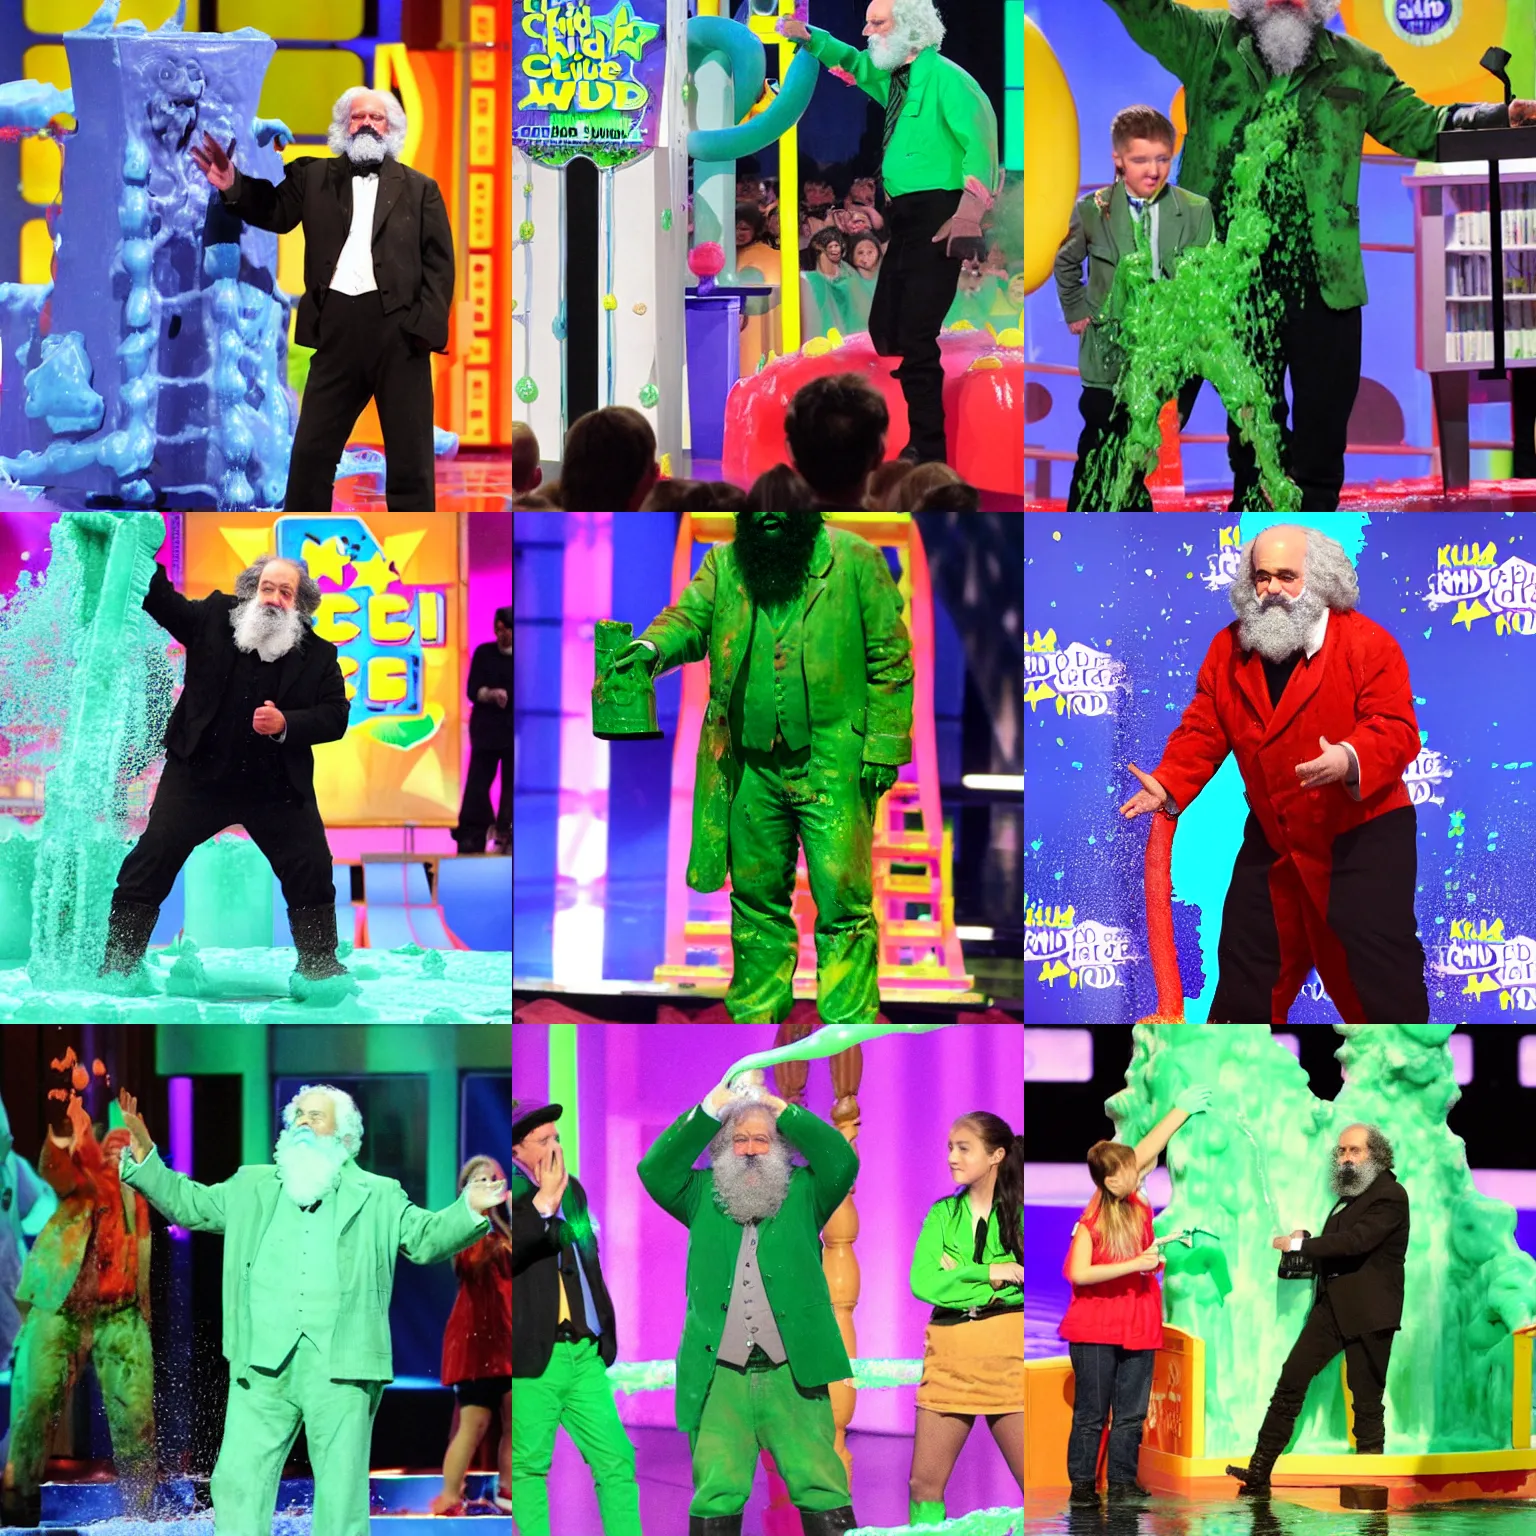 Prompt: karl marx getting slimed at the kid's choice awards